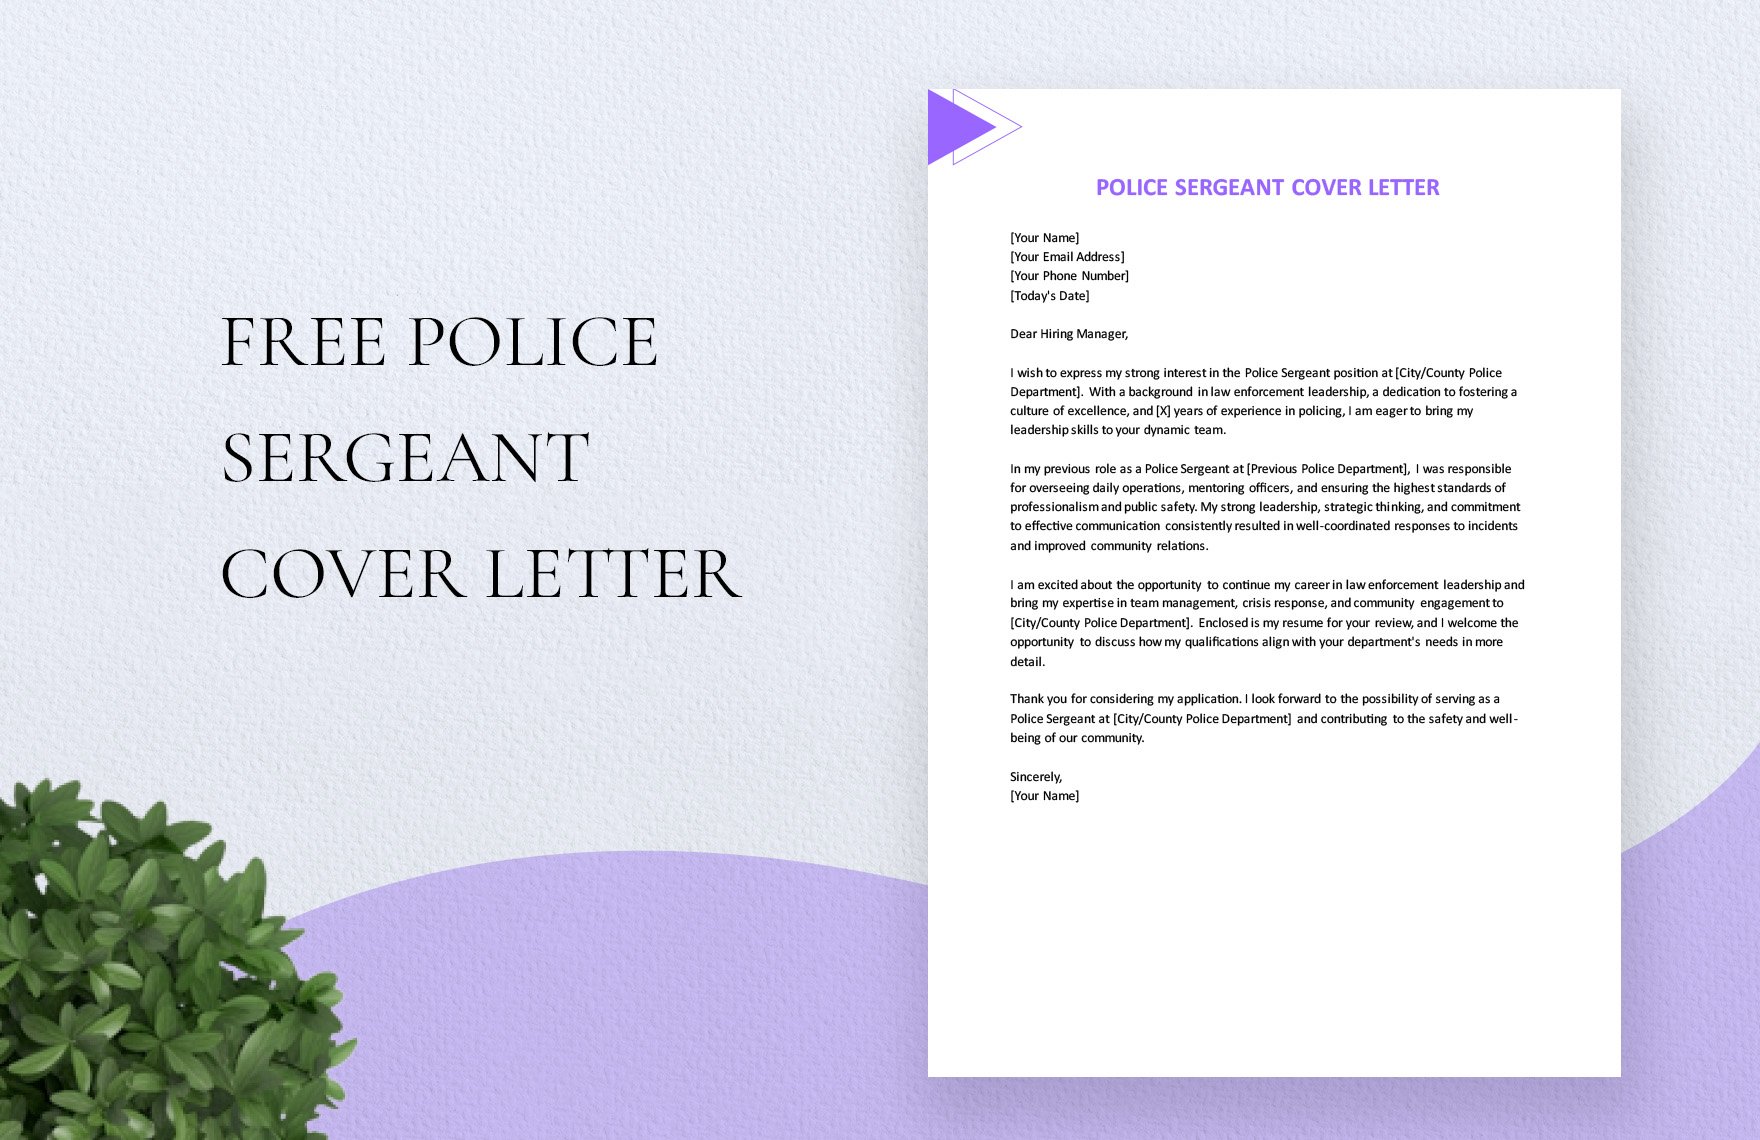 Police Sergeant Cover Letter